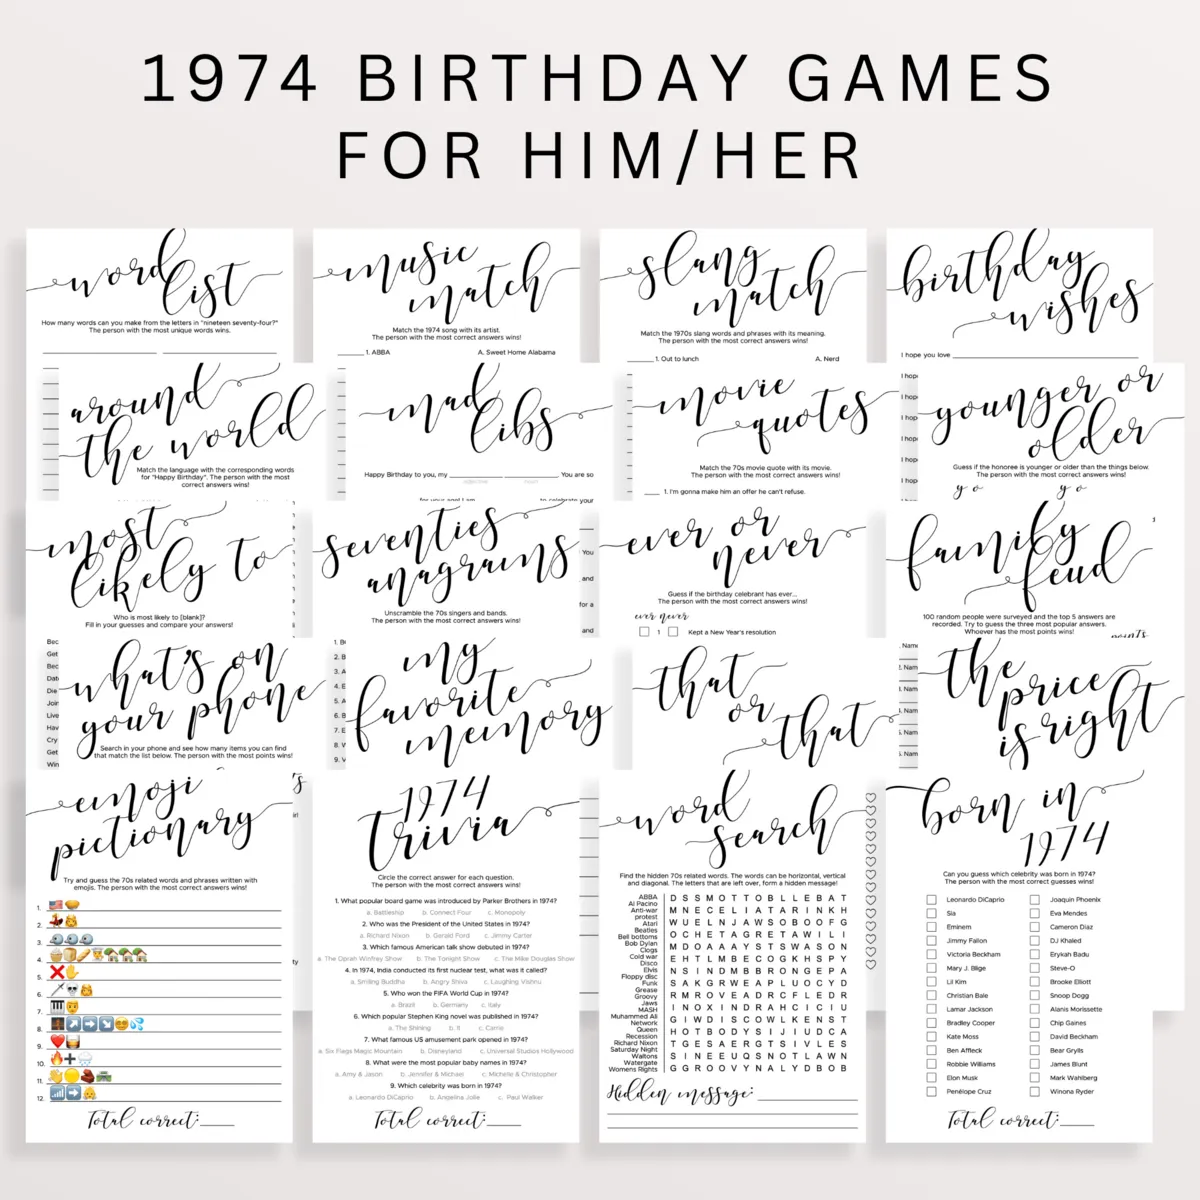 1974 Birthday Party Activity Ideas for Male and Female